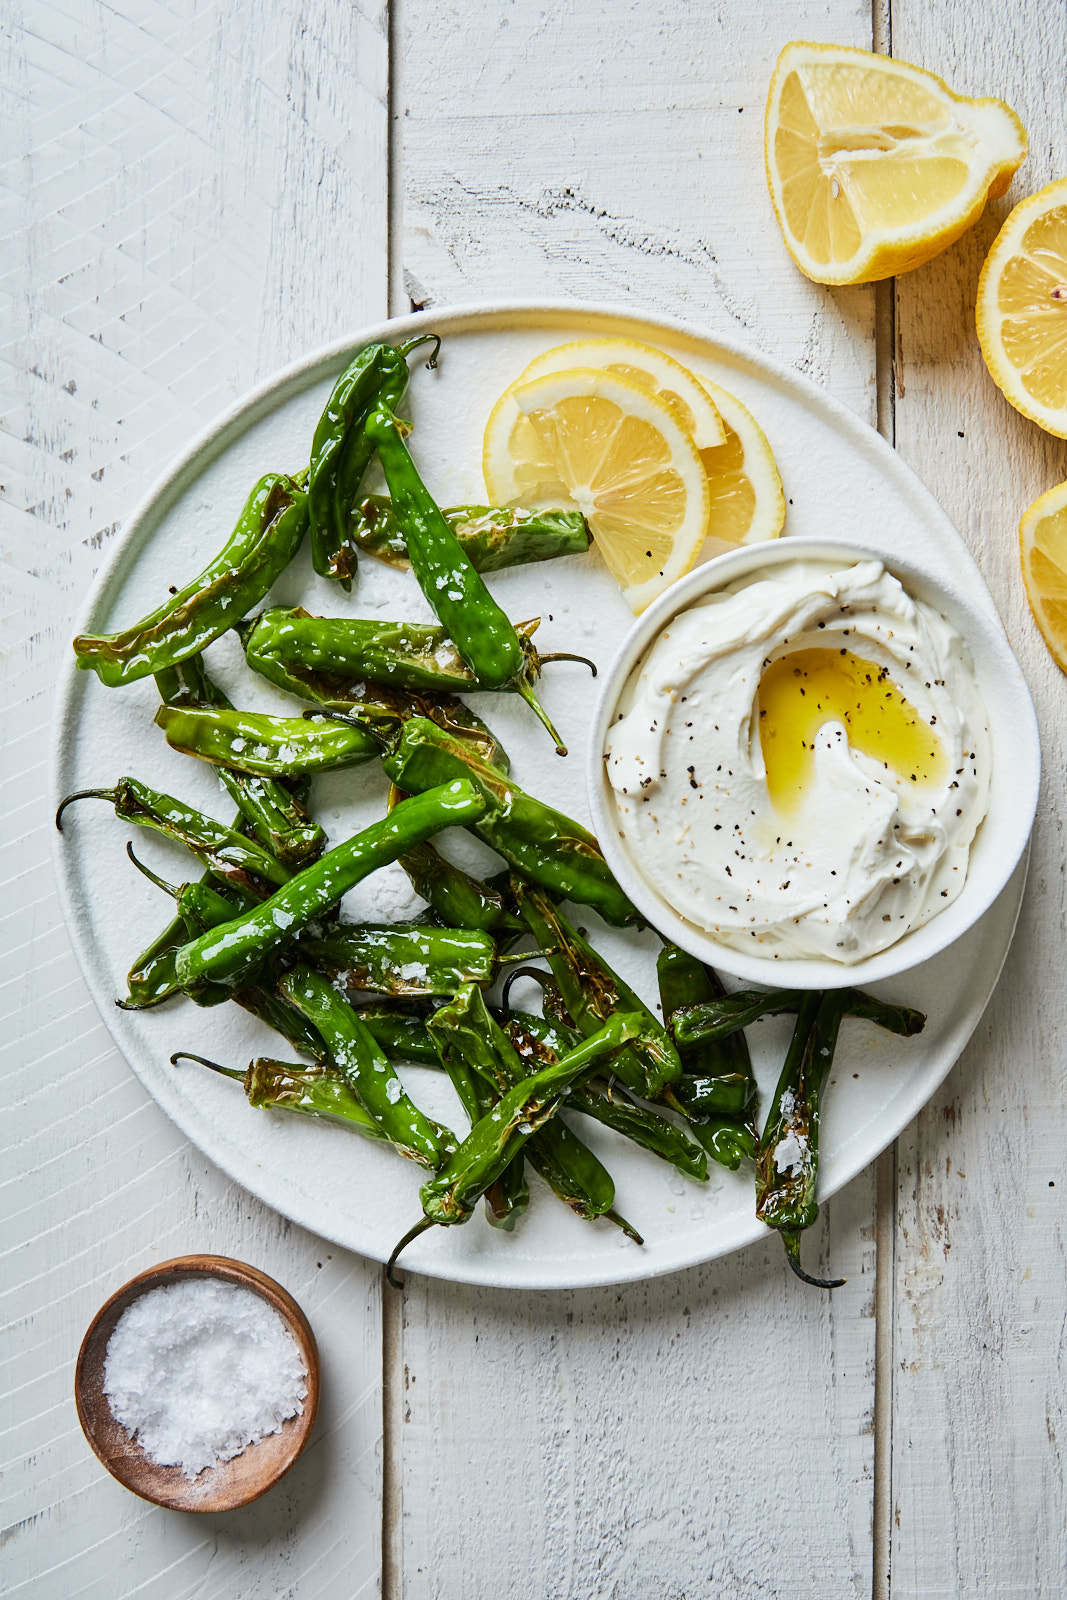 Blistered Shishito Peppers With a Lemony Whipped Goat Cheese Dip